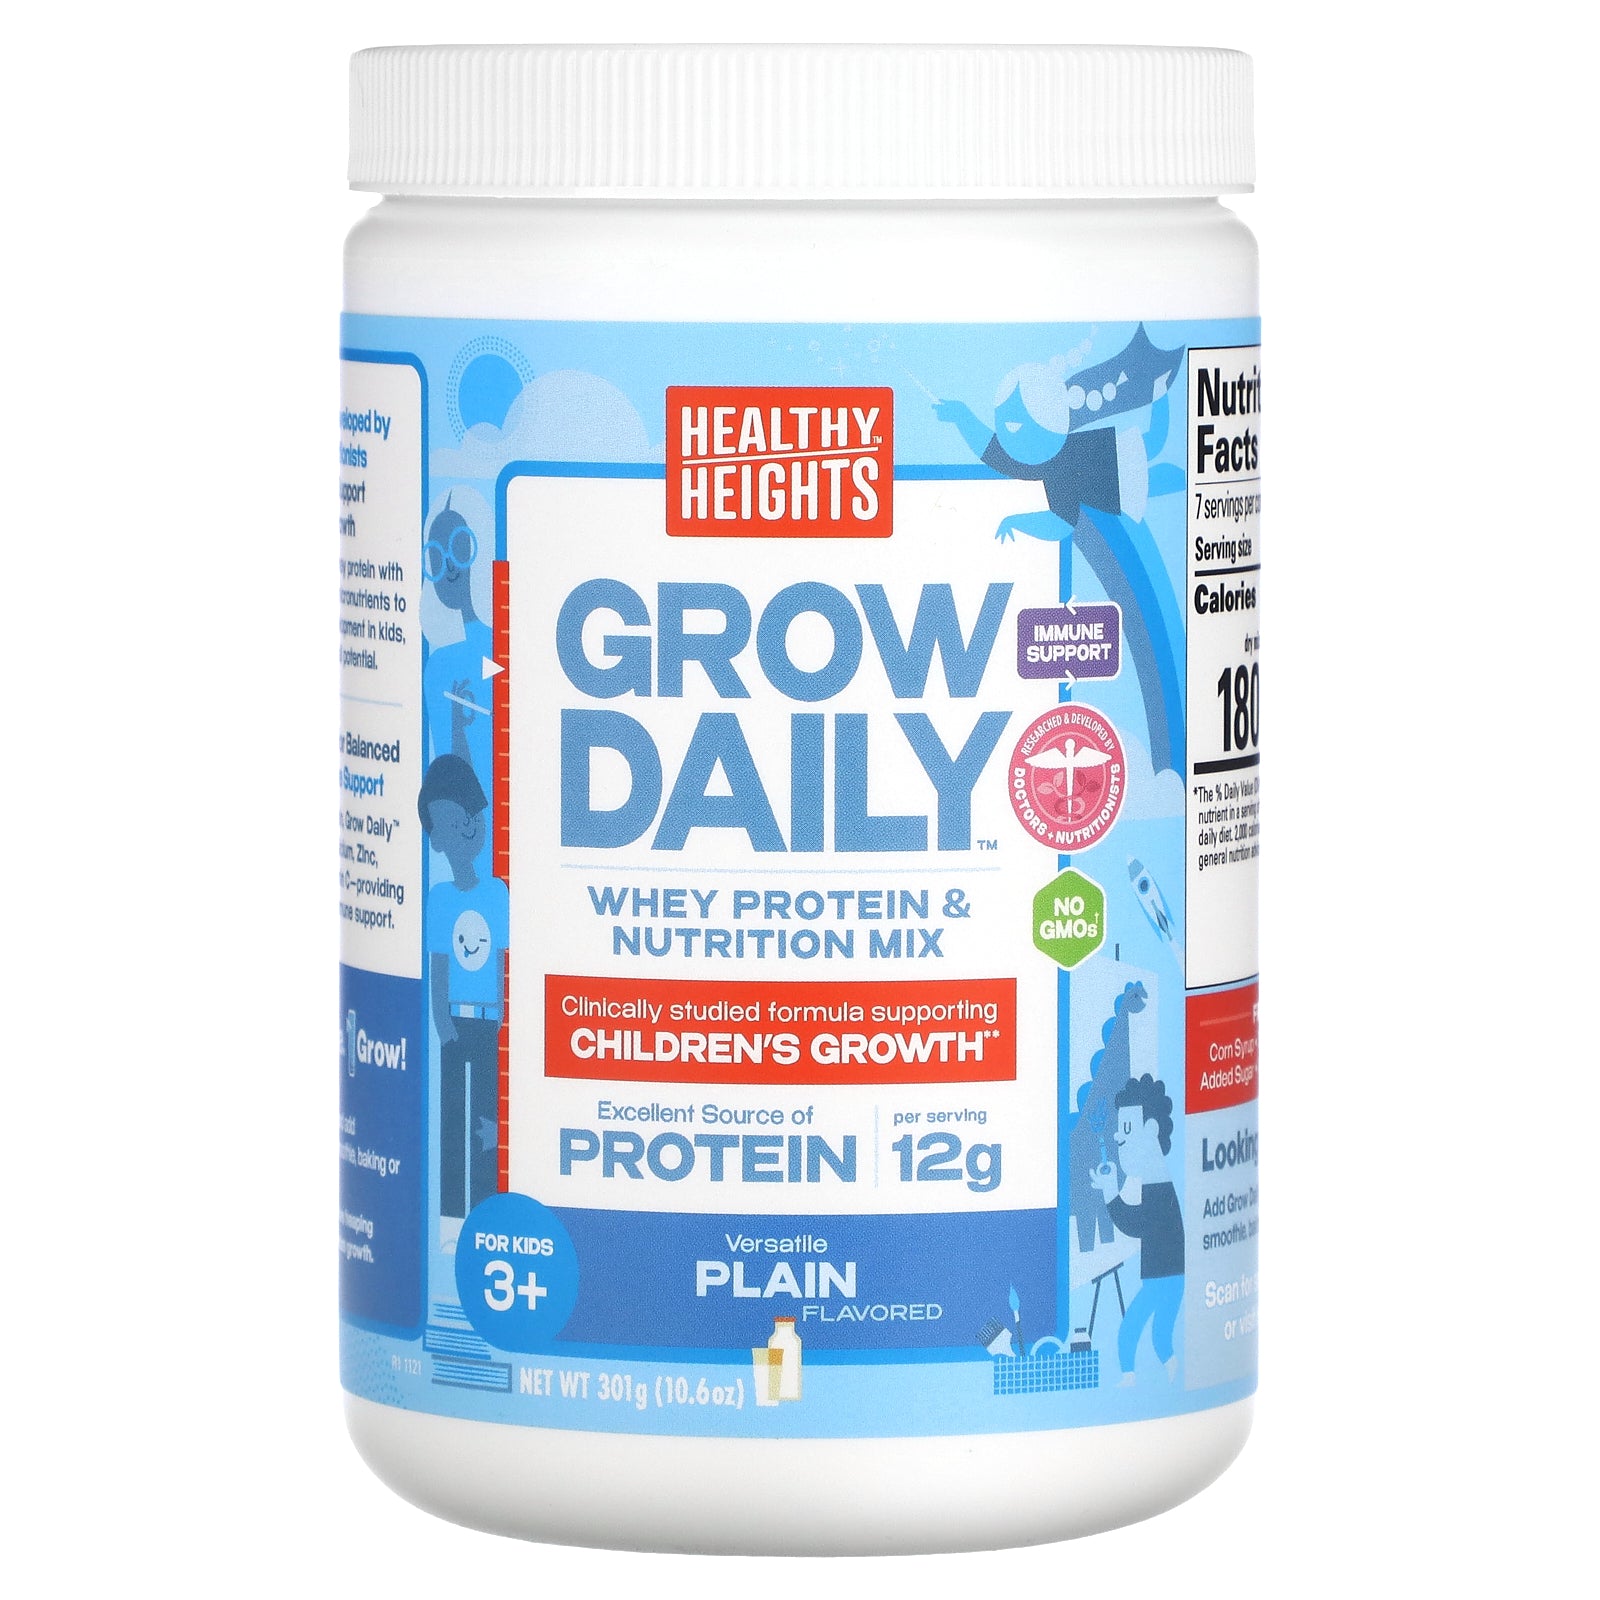 Healthy Heights, Grow Daily, Whey Protein & Nutrition Mix, For Kids 3+, Plain, 10.6 oz (301 g)